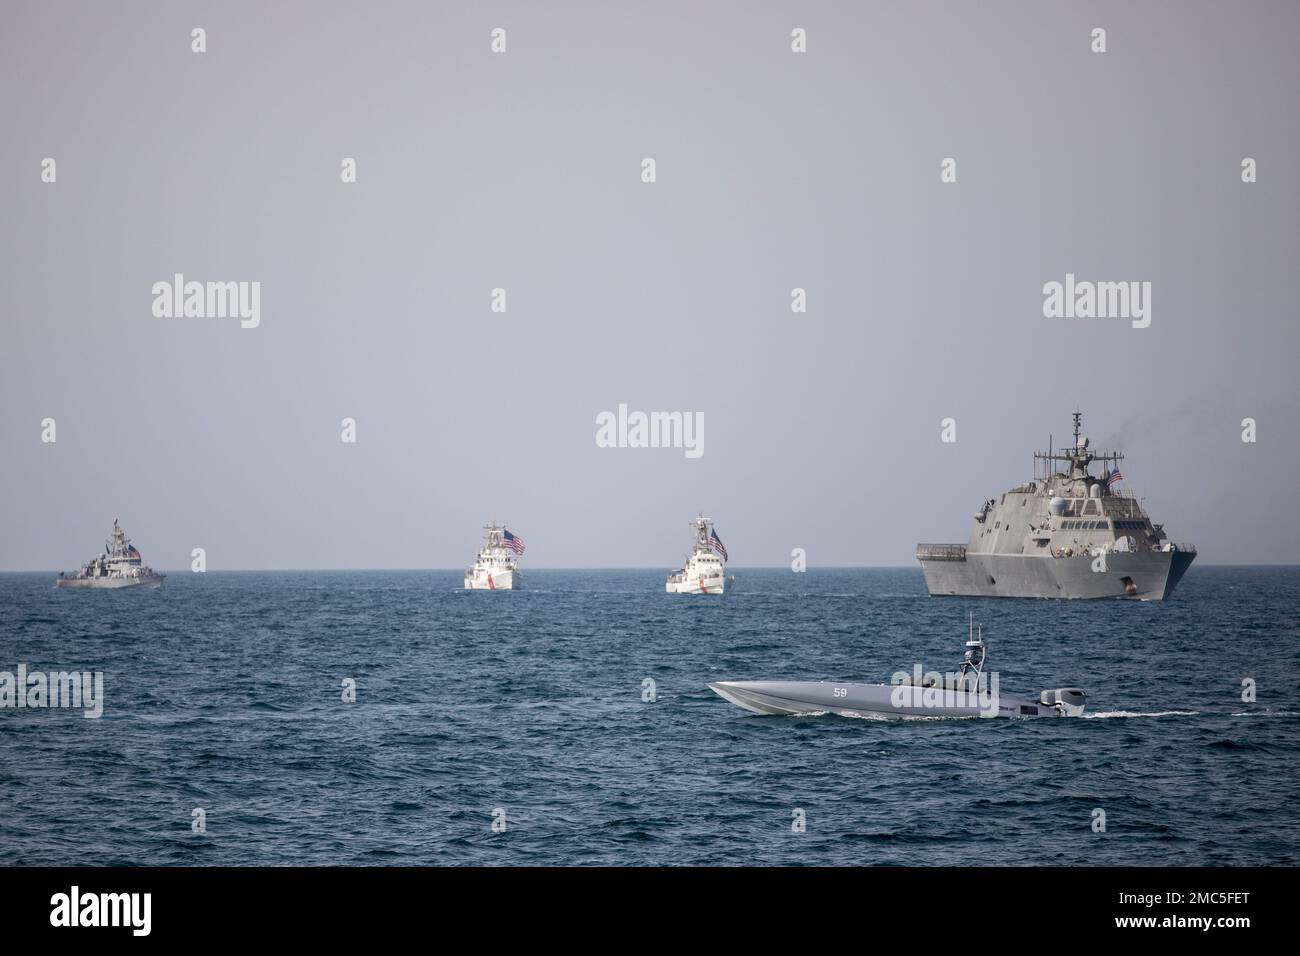 220626-A-JJ498-1220 ARABIAN GULF (June 26, 2022) A Devil Ray T-38 unmanned surface vessel, littoral combat ship USS Sioux City (LCS 11) and U.S. Coast Guard cutters USCGC Baranof (WPB 1318) and USCGC Robert Goldman (WPC 1142) and coastal patrol ship USS Thunderbolt (PC 12) sail in the Arabian Gulf, June 26. U.S. naval forces regularly operate across the Middle East region to help ensure security and stability. Stock Photo